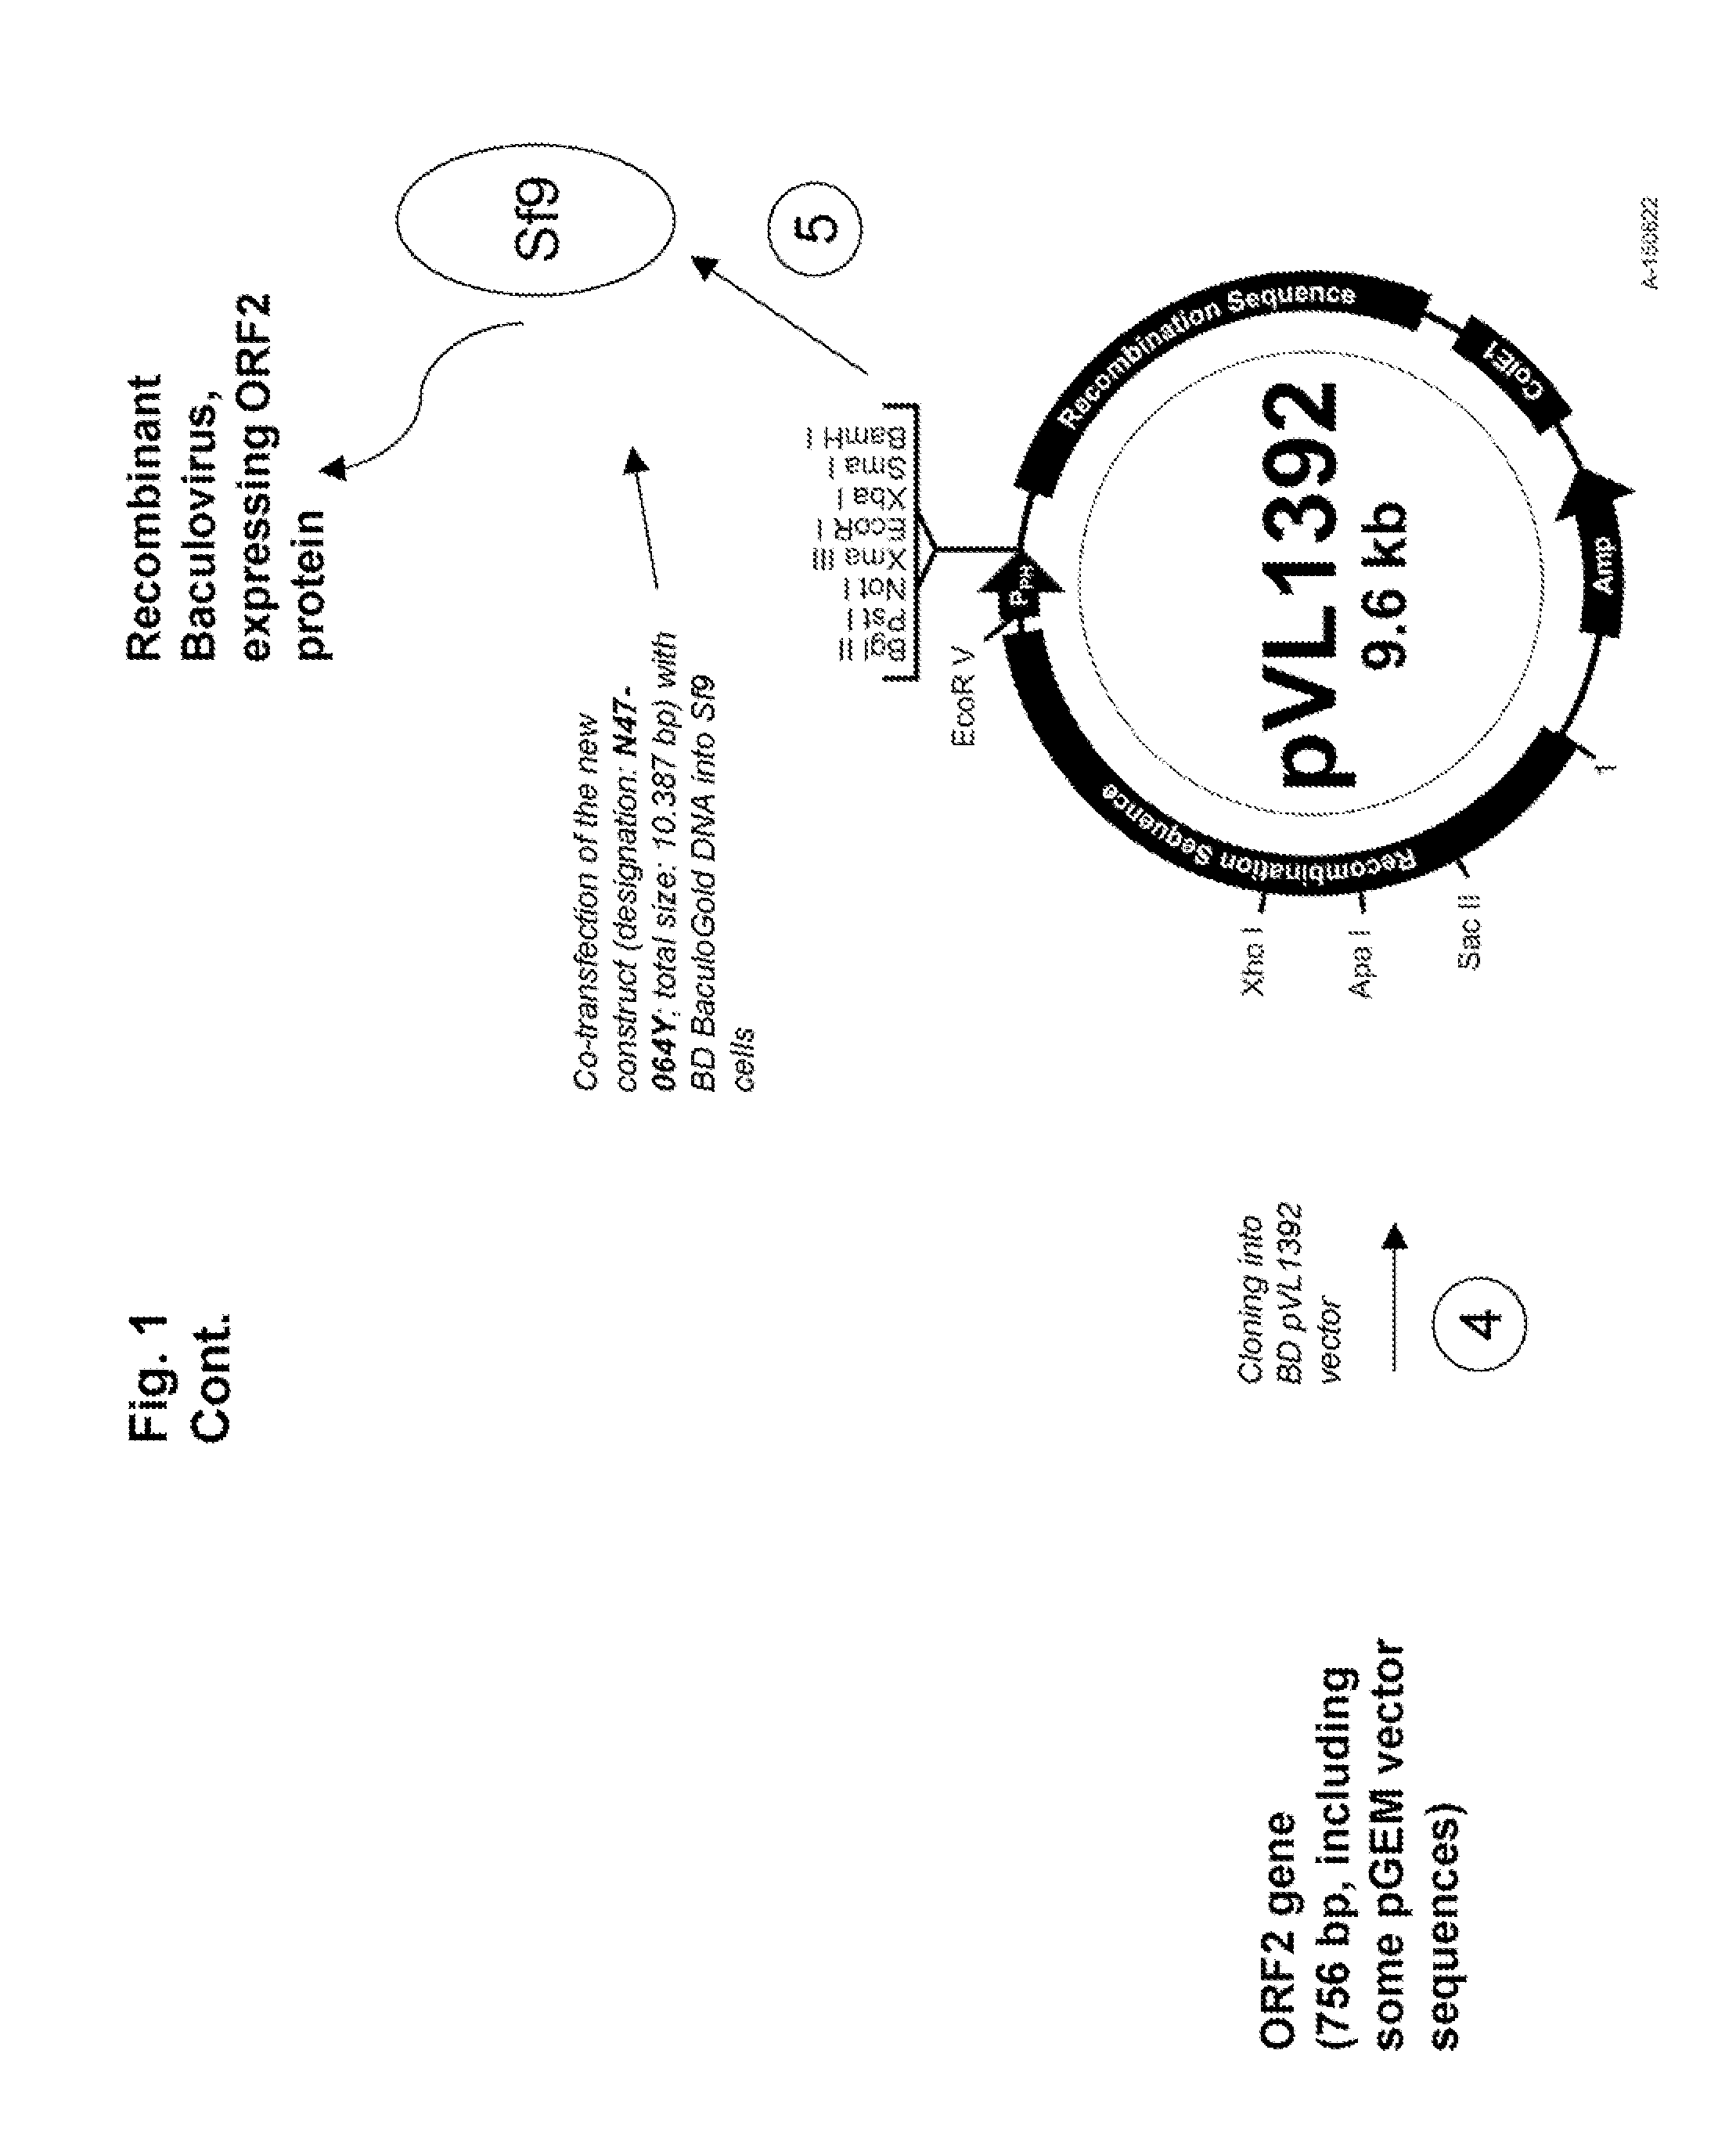 Pcv2 immunogenic compositions and methods of producing such compositions